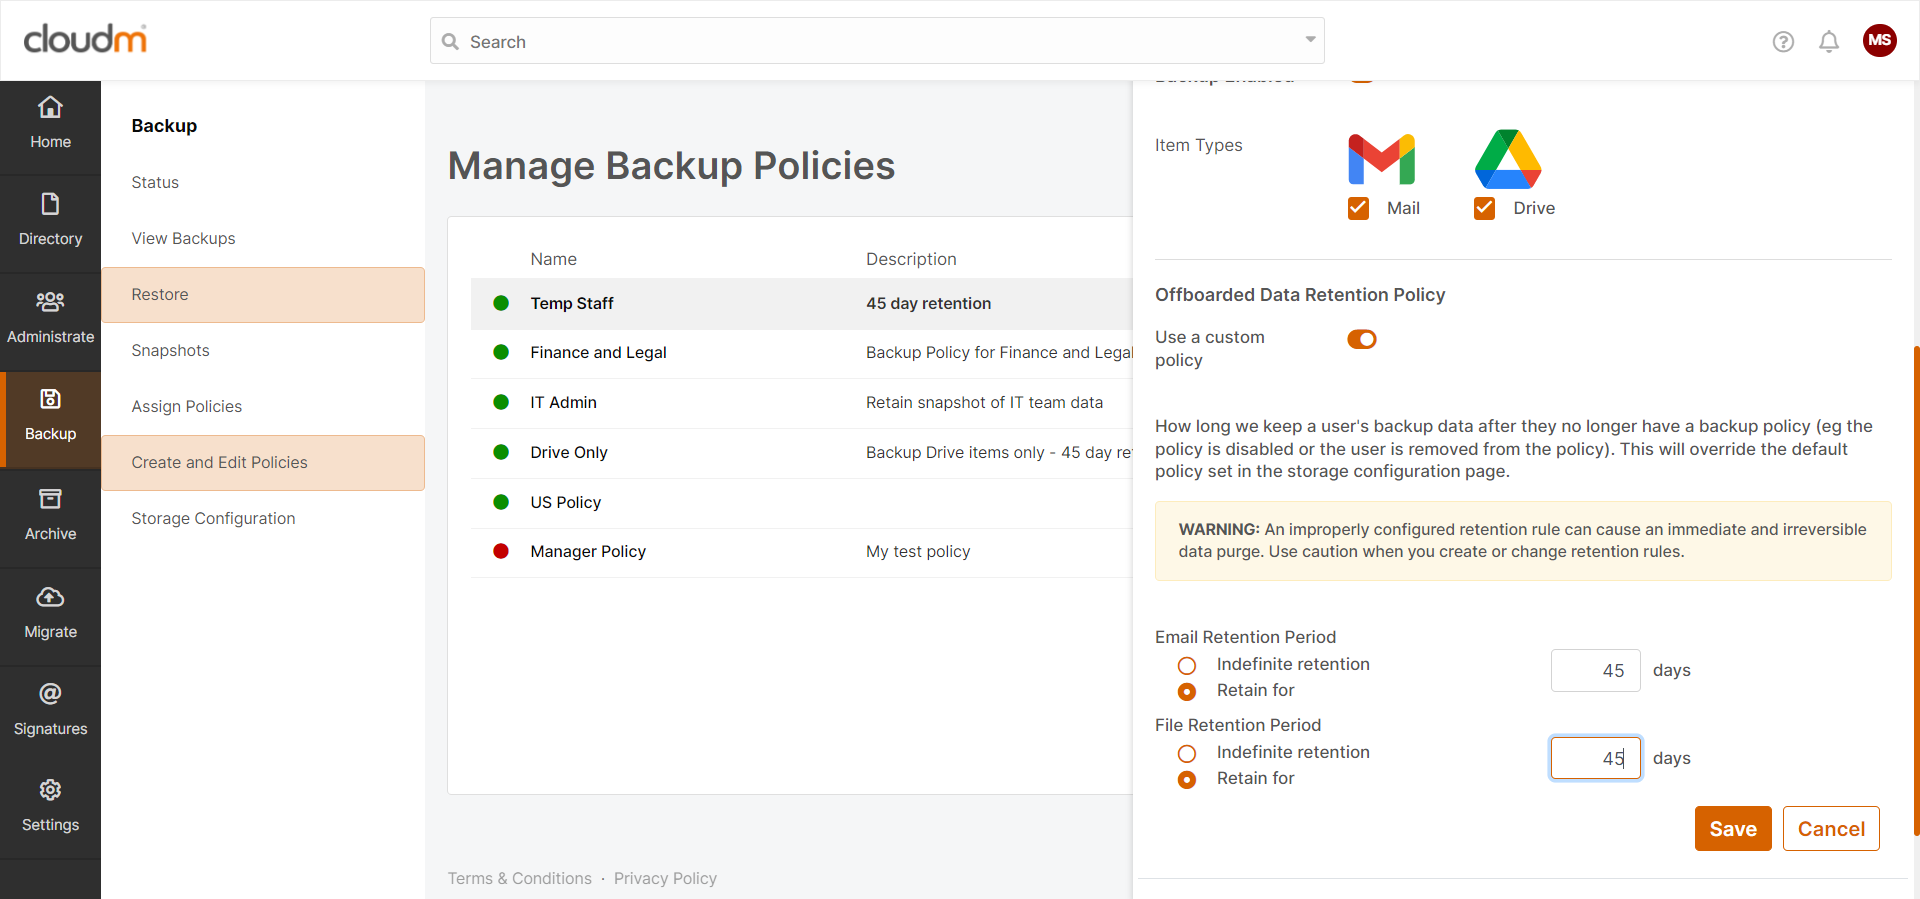 CloudM Backup data retention policy